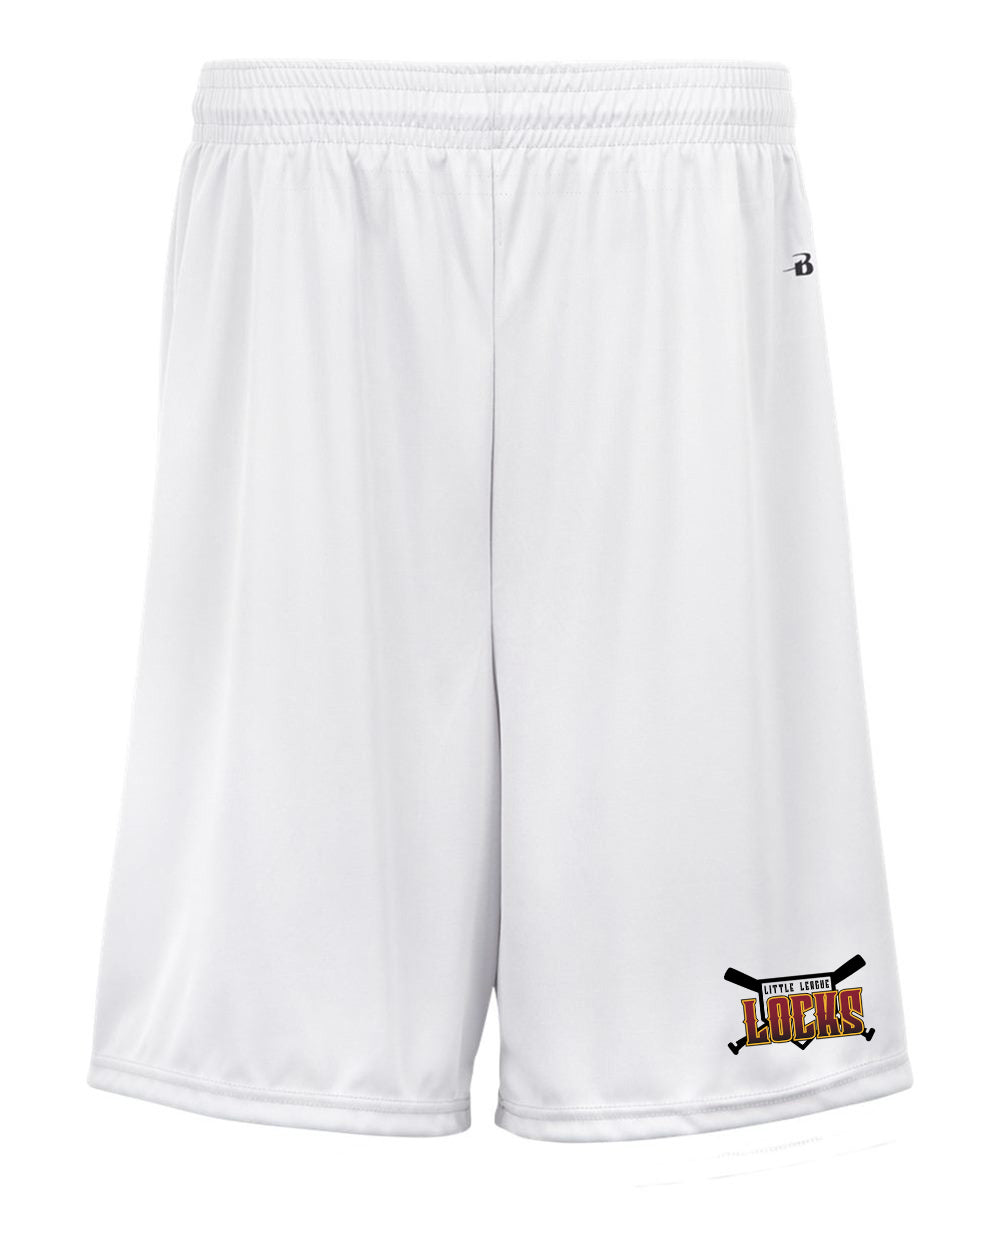 Locks Youth Badger Shorts "Classic" - 2107 (color options available)